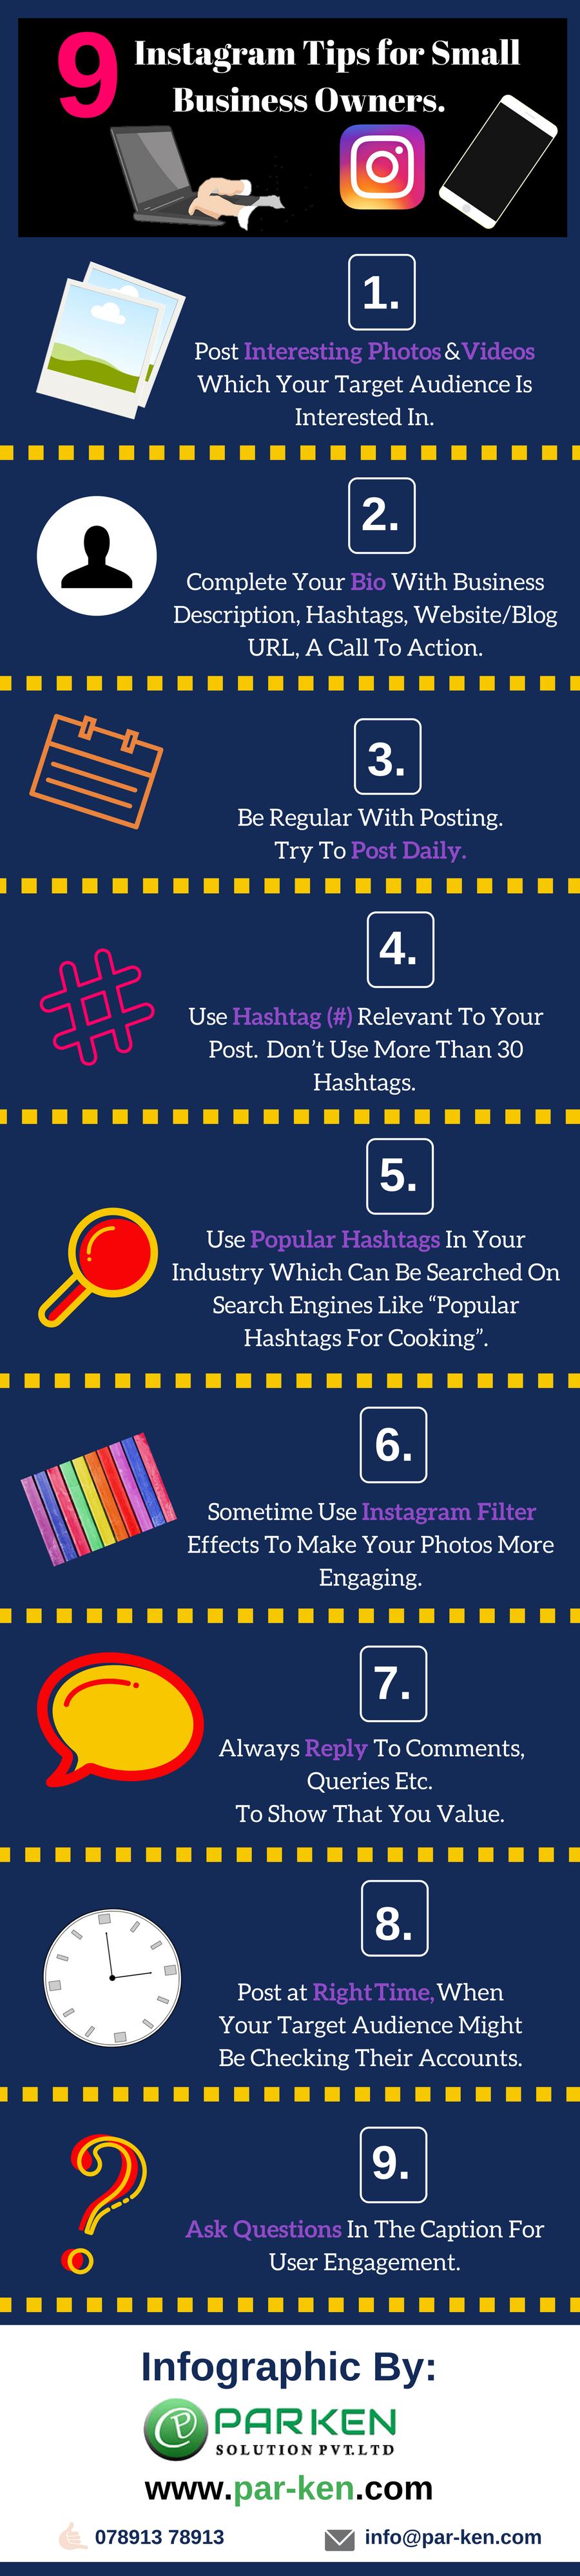 How to Use Instagram Tips to Promote Your Business